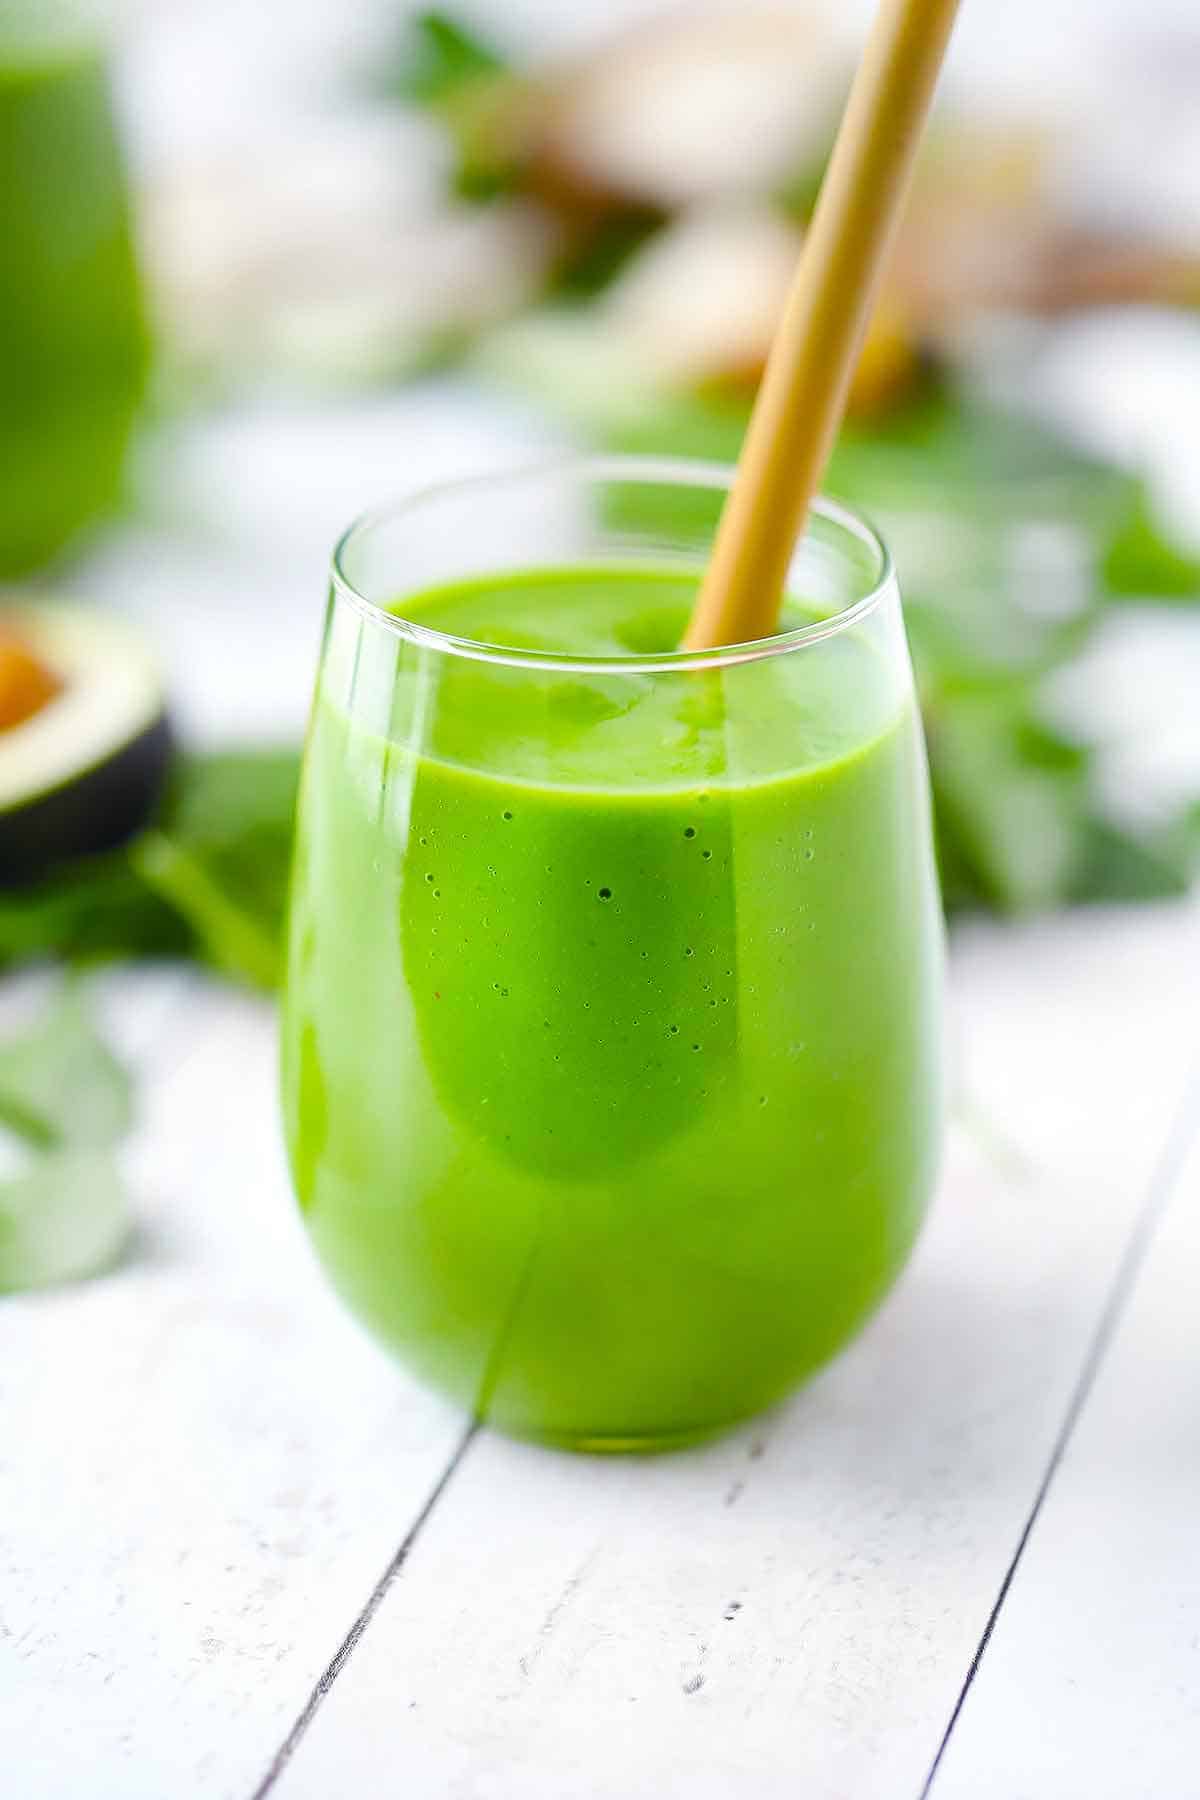 Close up photo of a green smoothie in a wine glass with a bamboo straw.